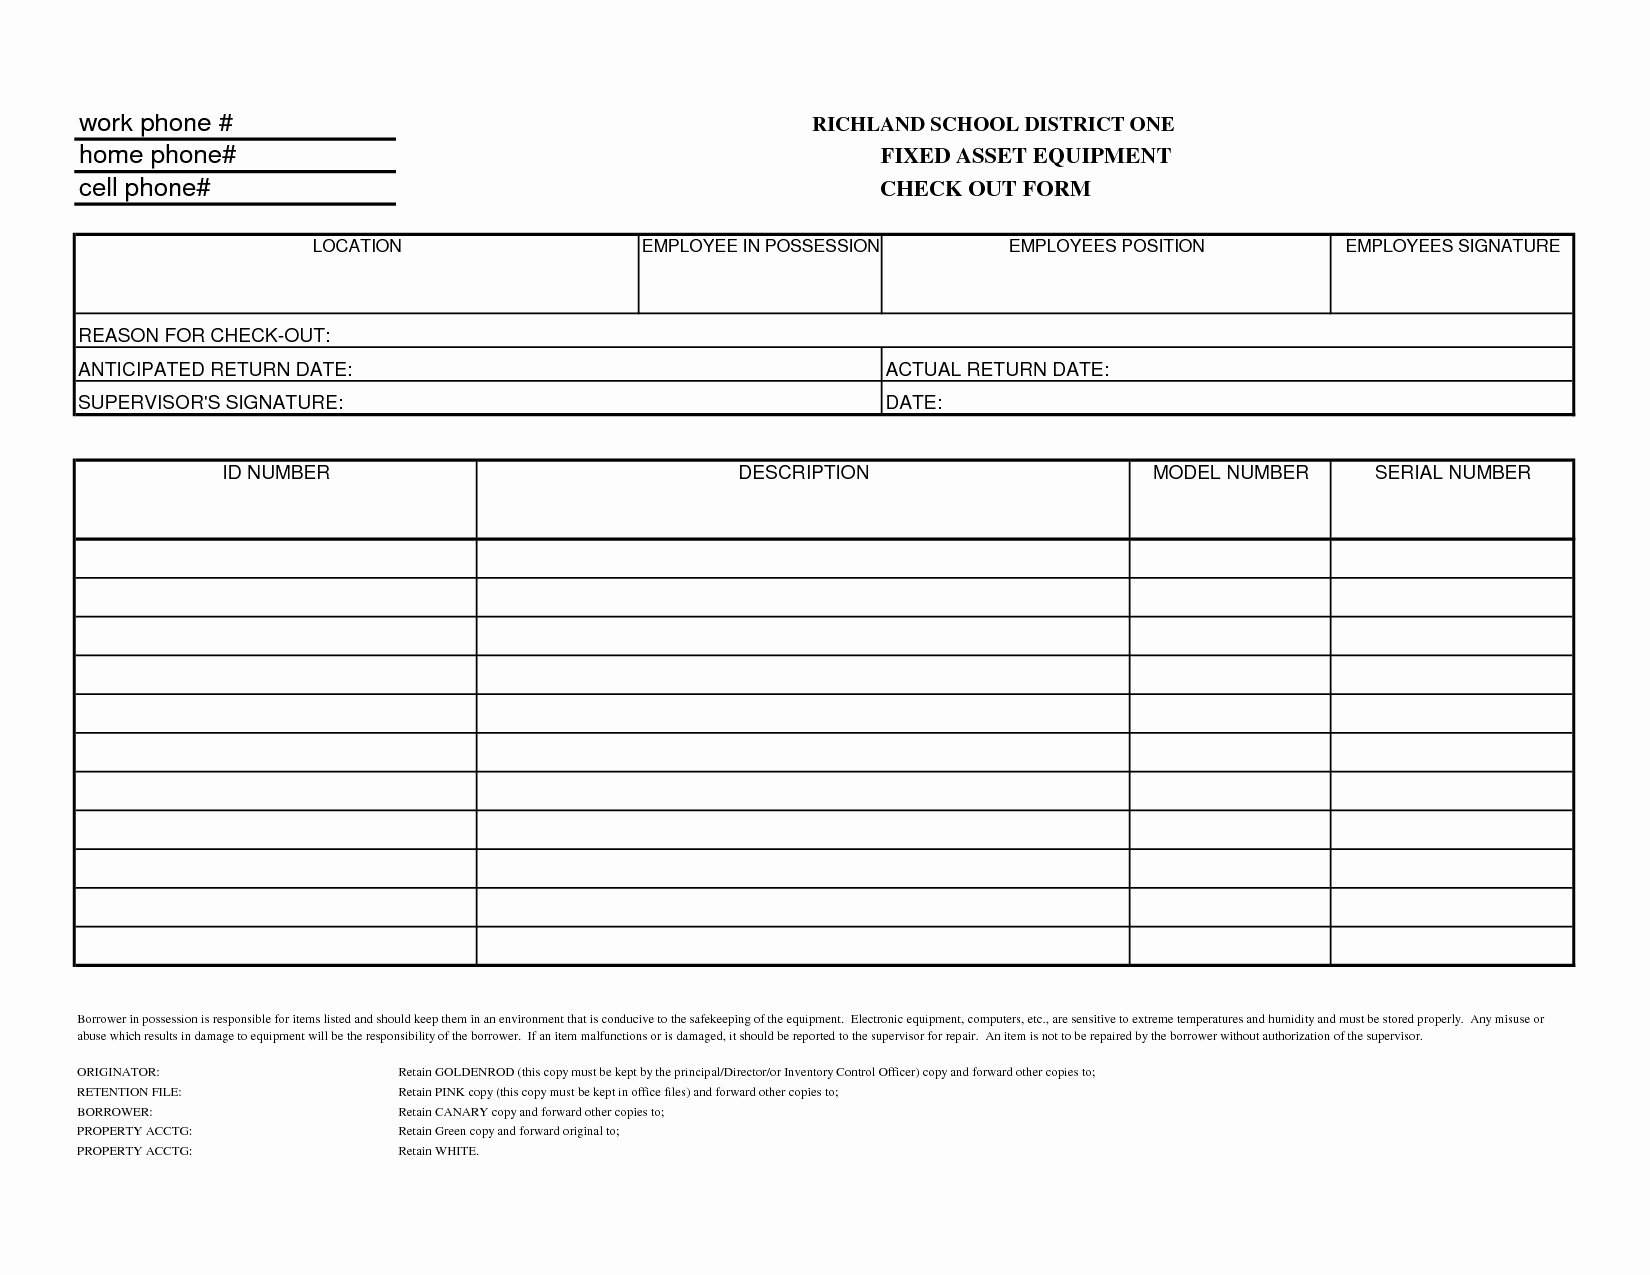 Equipment Checkout form Template Lovely Inventory Check Out Sheet Template Templates Station